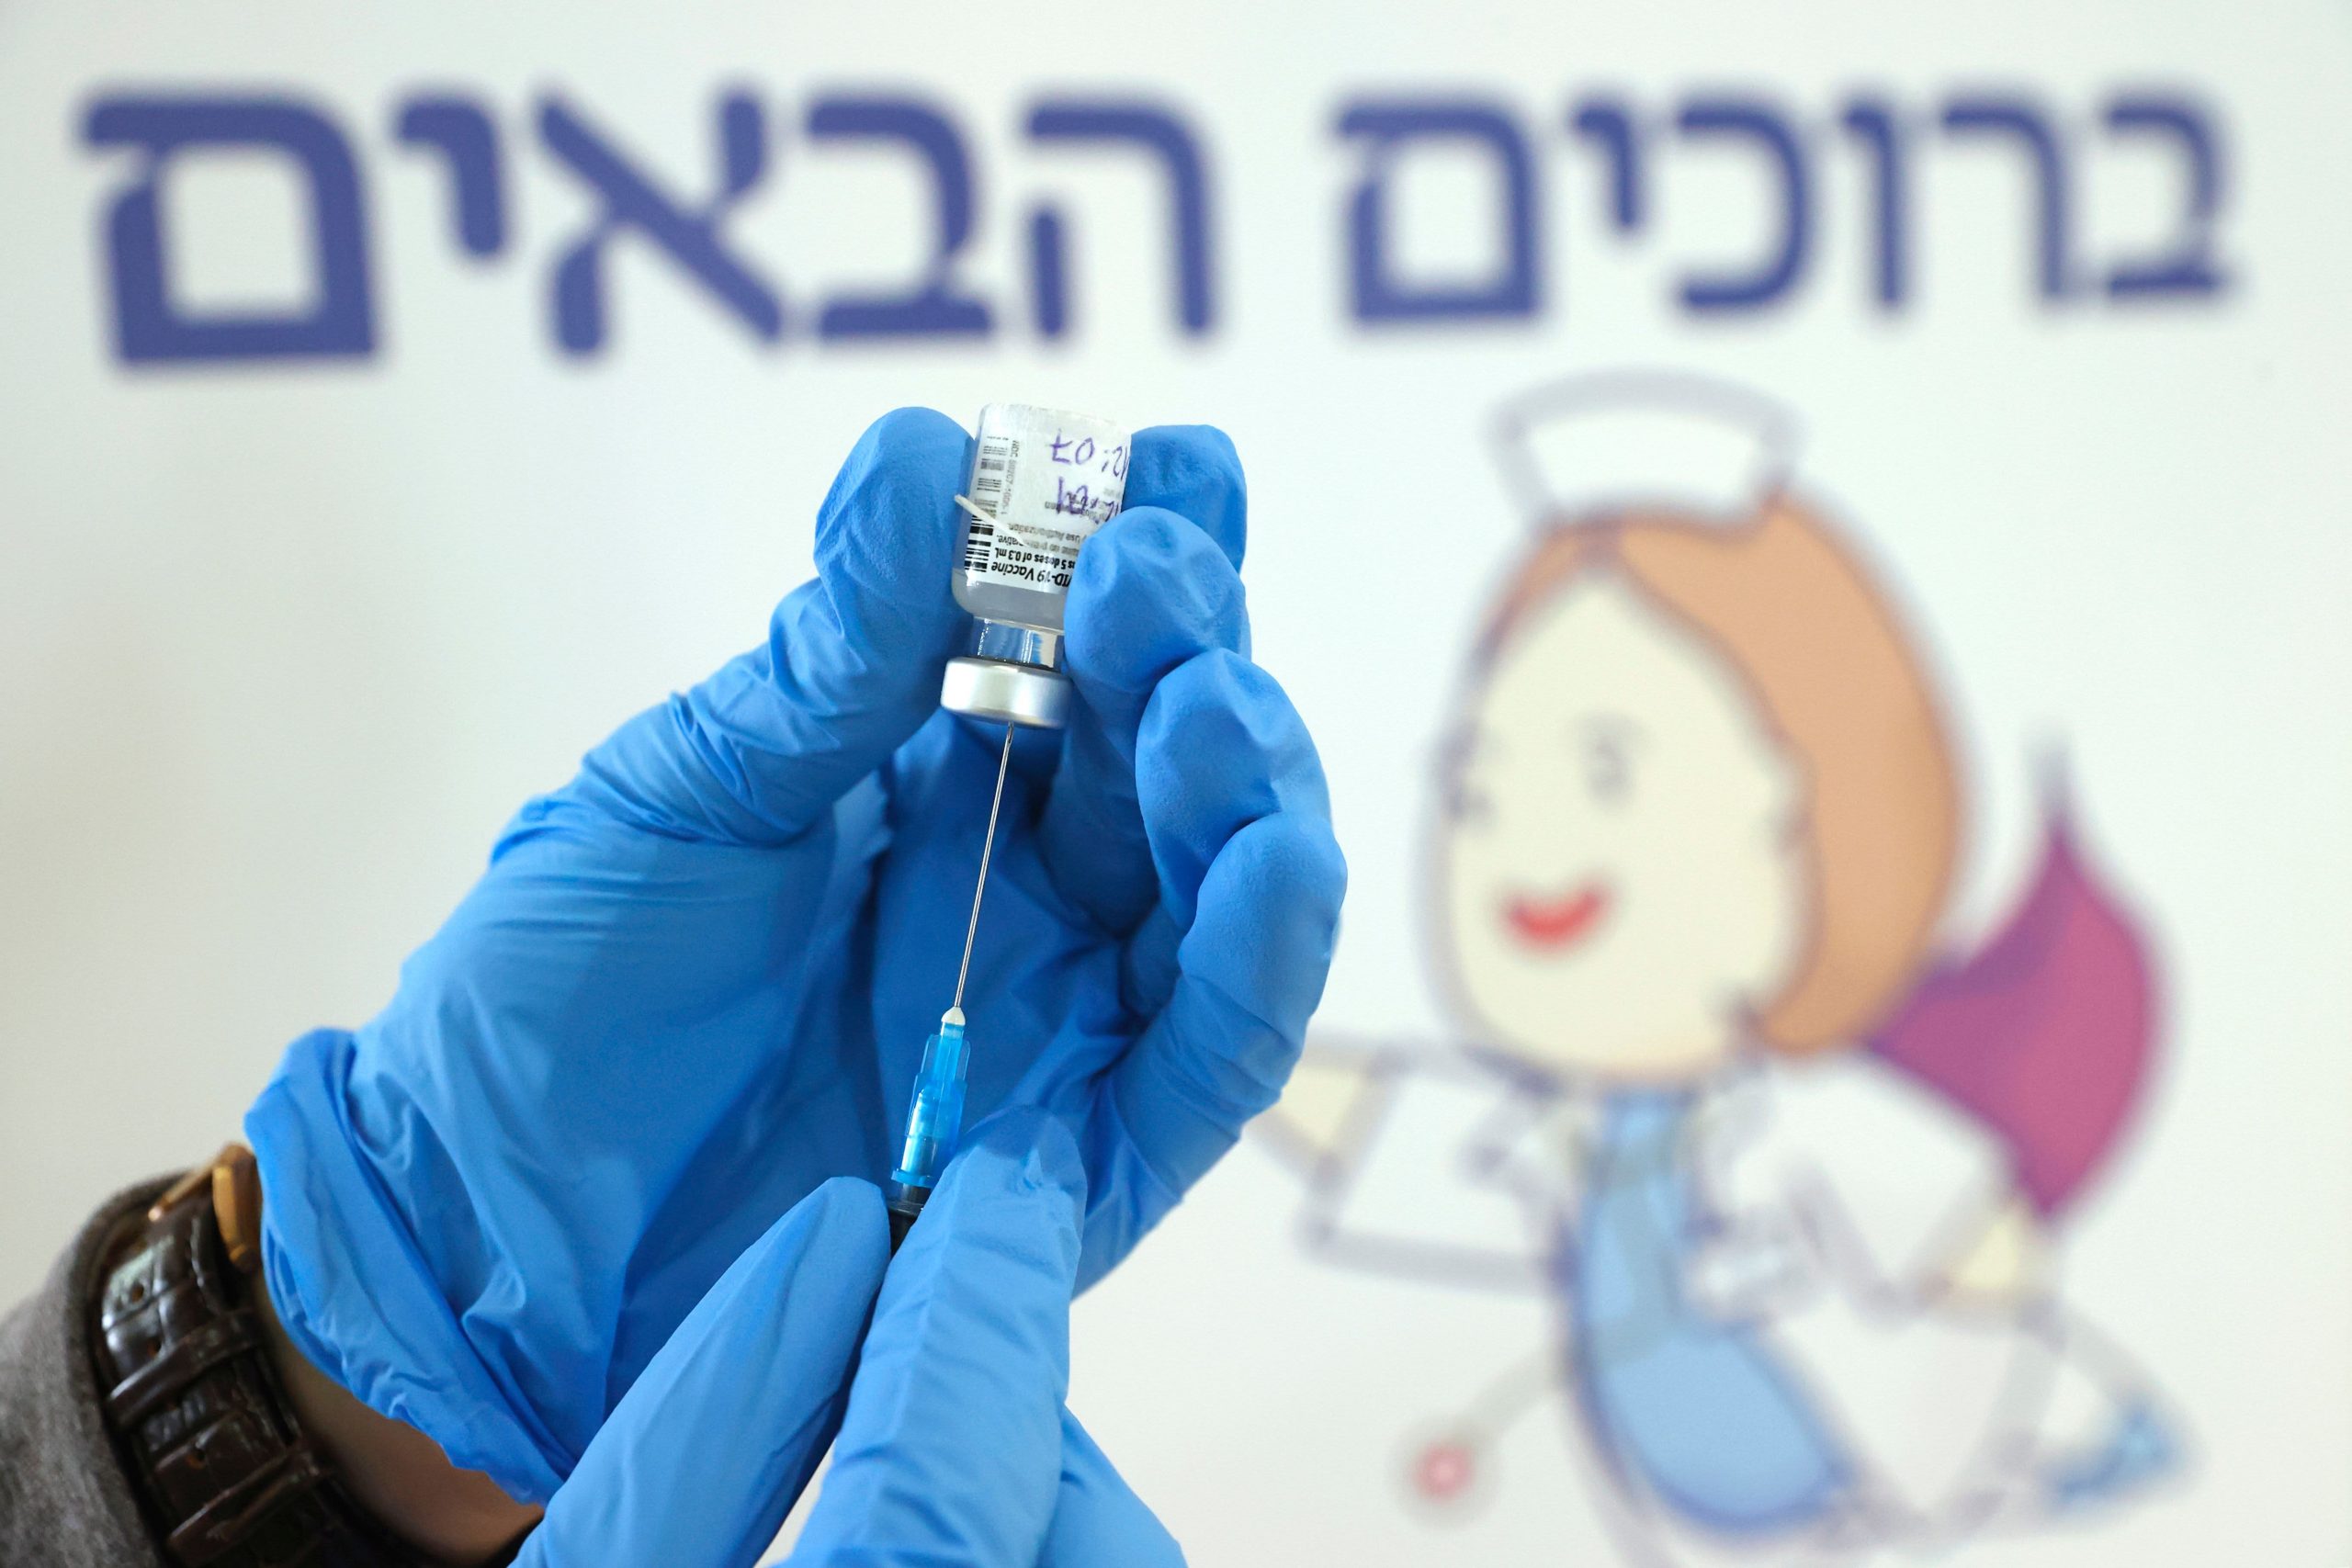 Israeli data indicate that mass vaccinations have resulted in a decrease in severe Covid cases, according to the CDC study